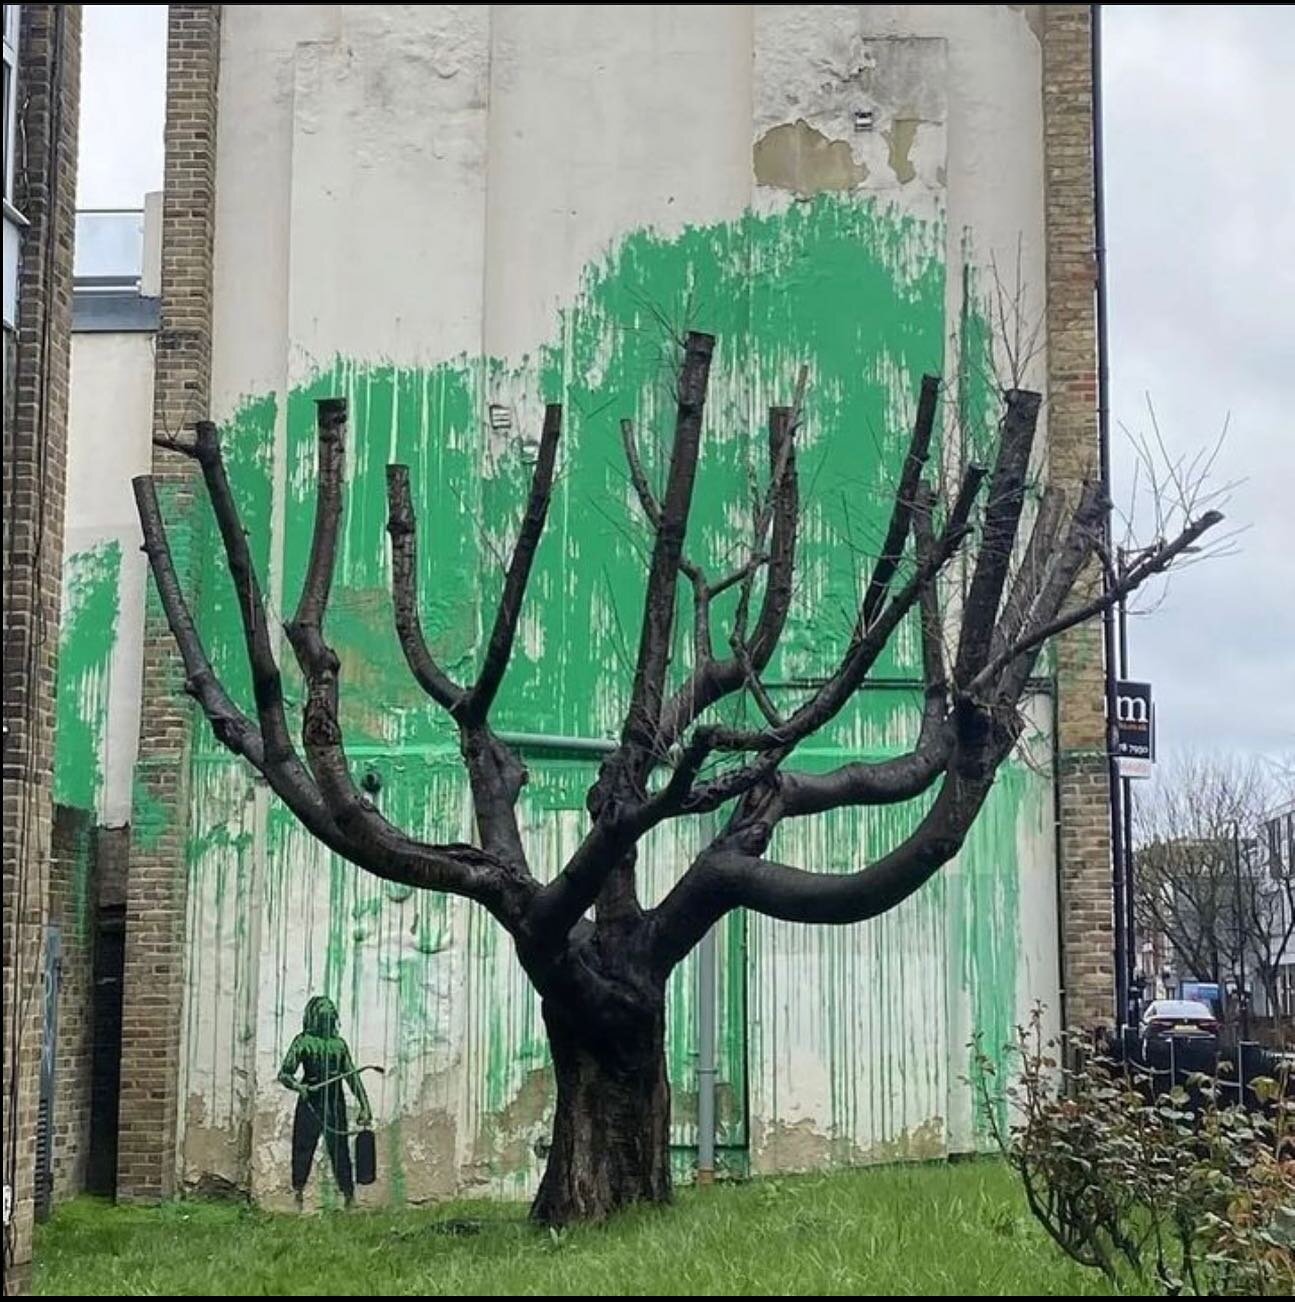 Is it Banksy? 🌳

A possible new @banksy piece has gone up on a side of a building in Finsbury Park, North London. 

The piece which interacts with an old lifeless tree sprung up over night and has already gained a huge amount of media coverage. 

Wh